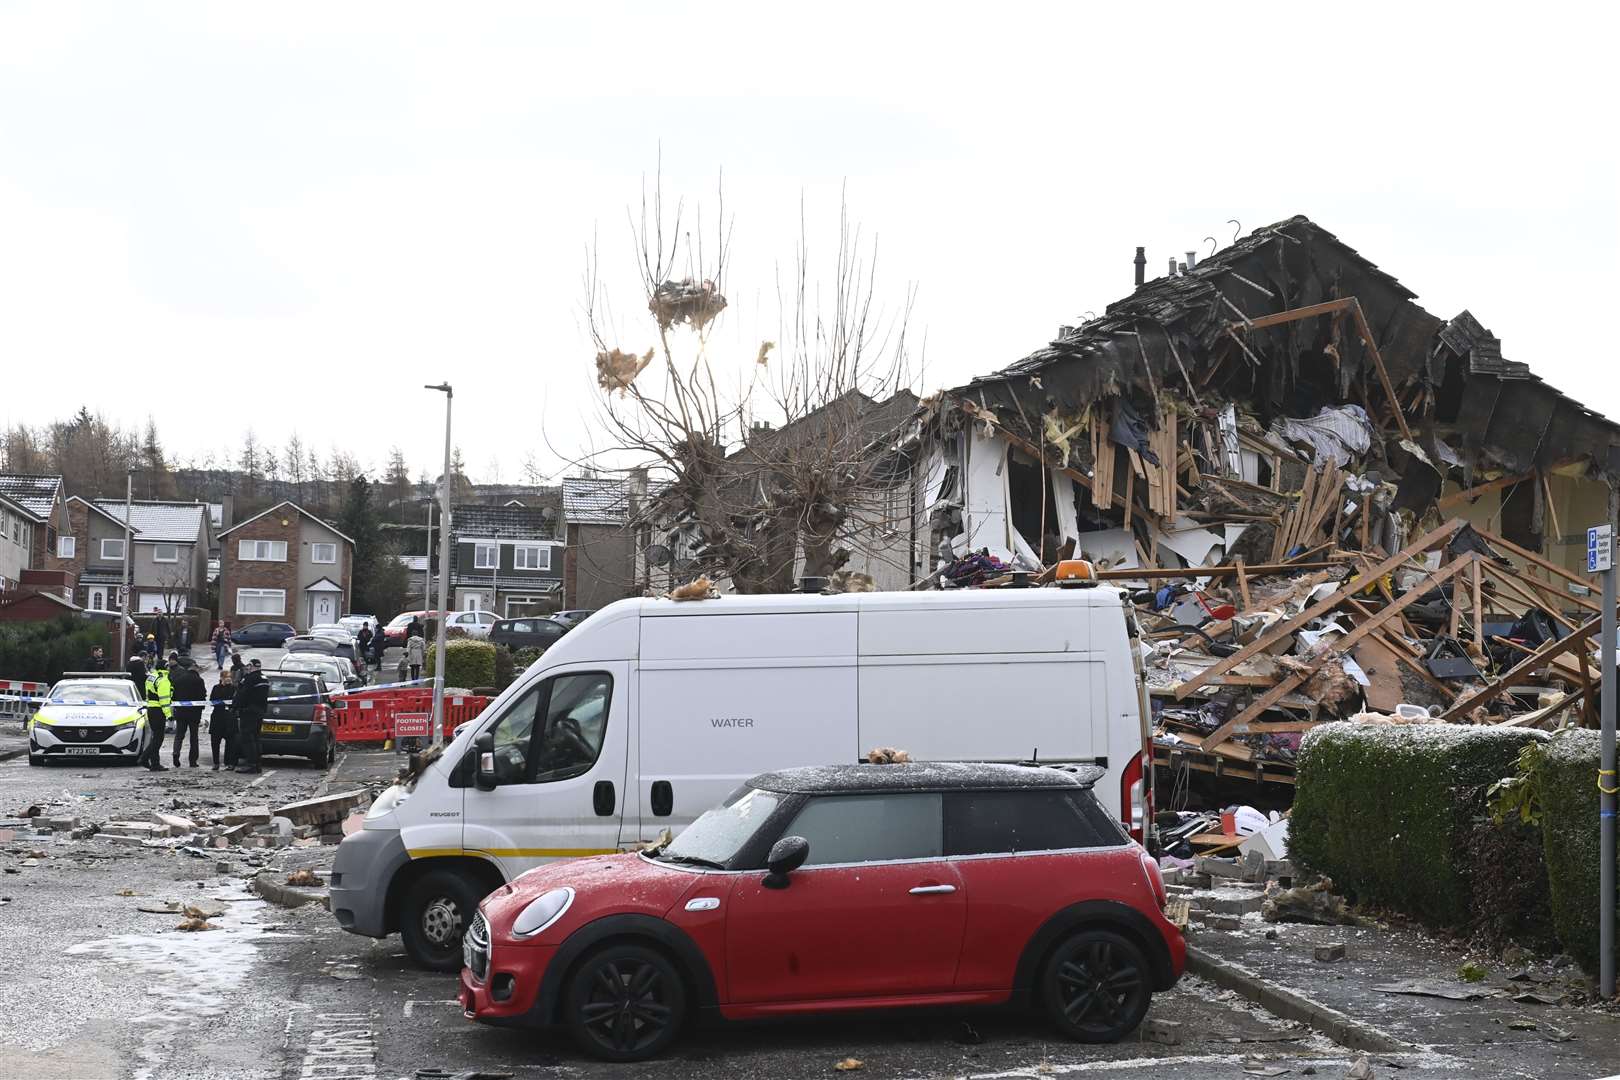 Rubble was strewn across the street (Lesley Martin/PA)